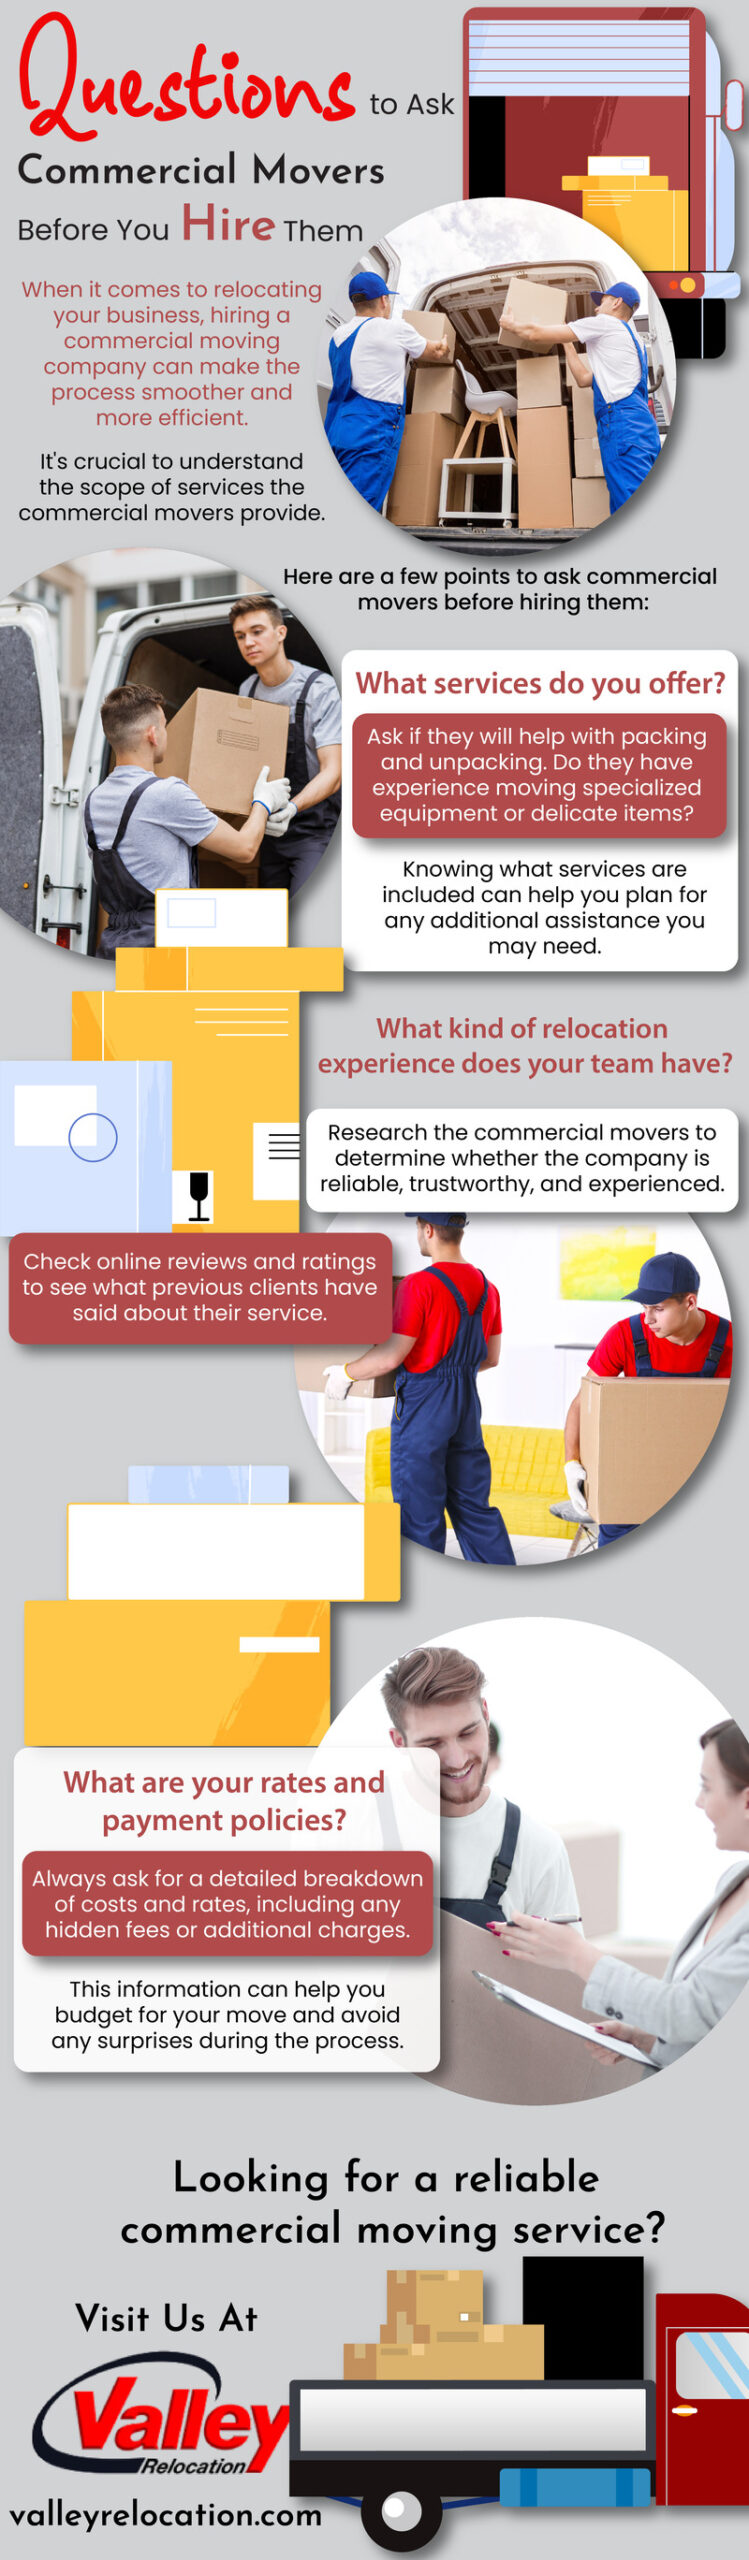 Questions To Ask Commercial Movers Before You Hire Them